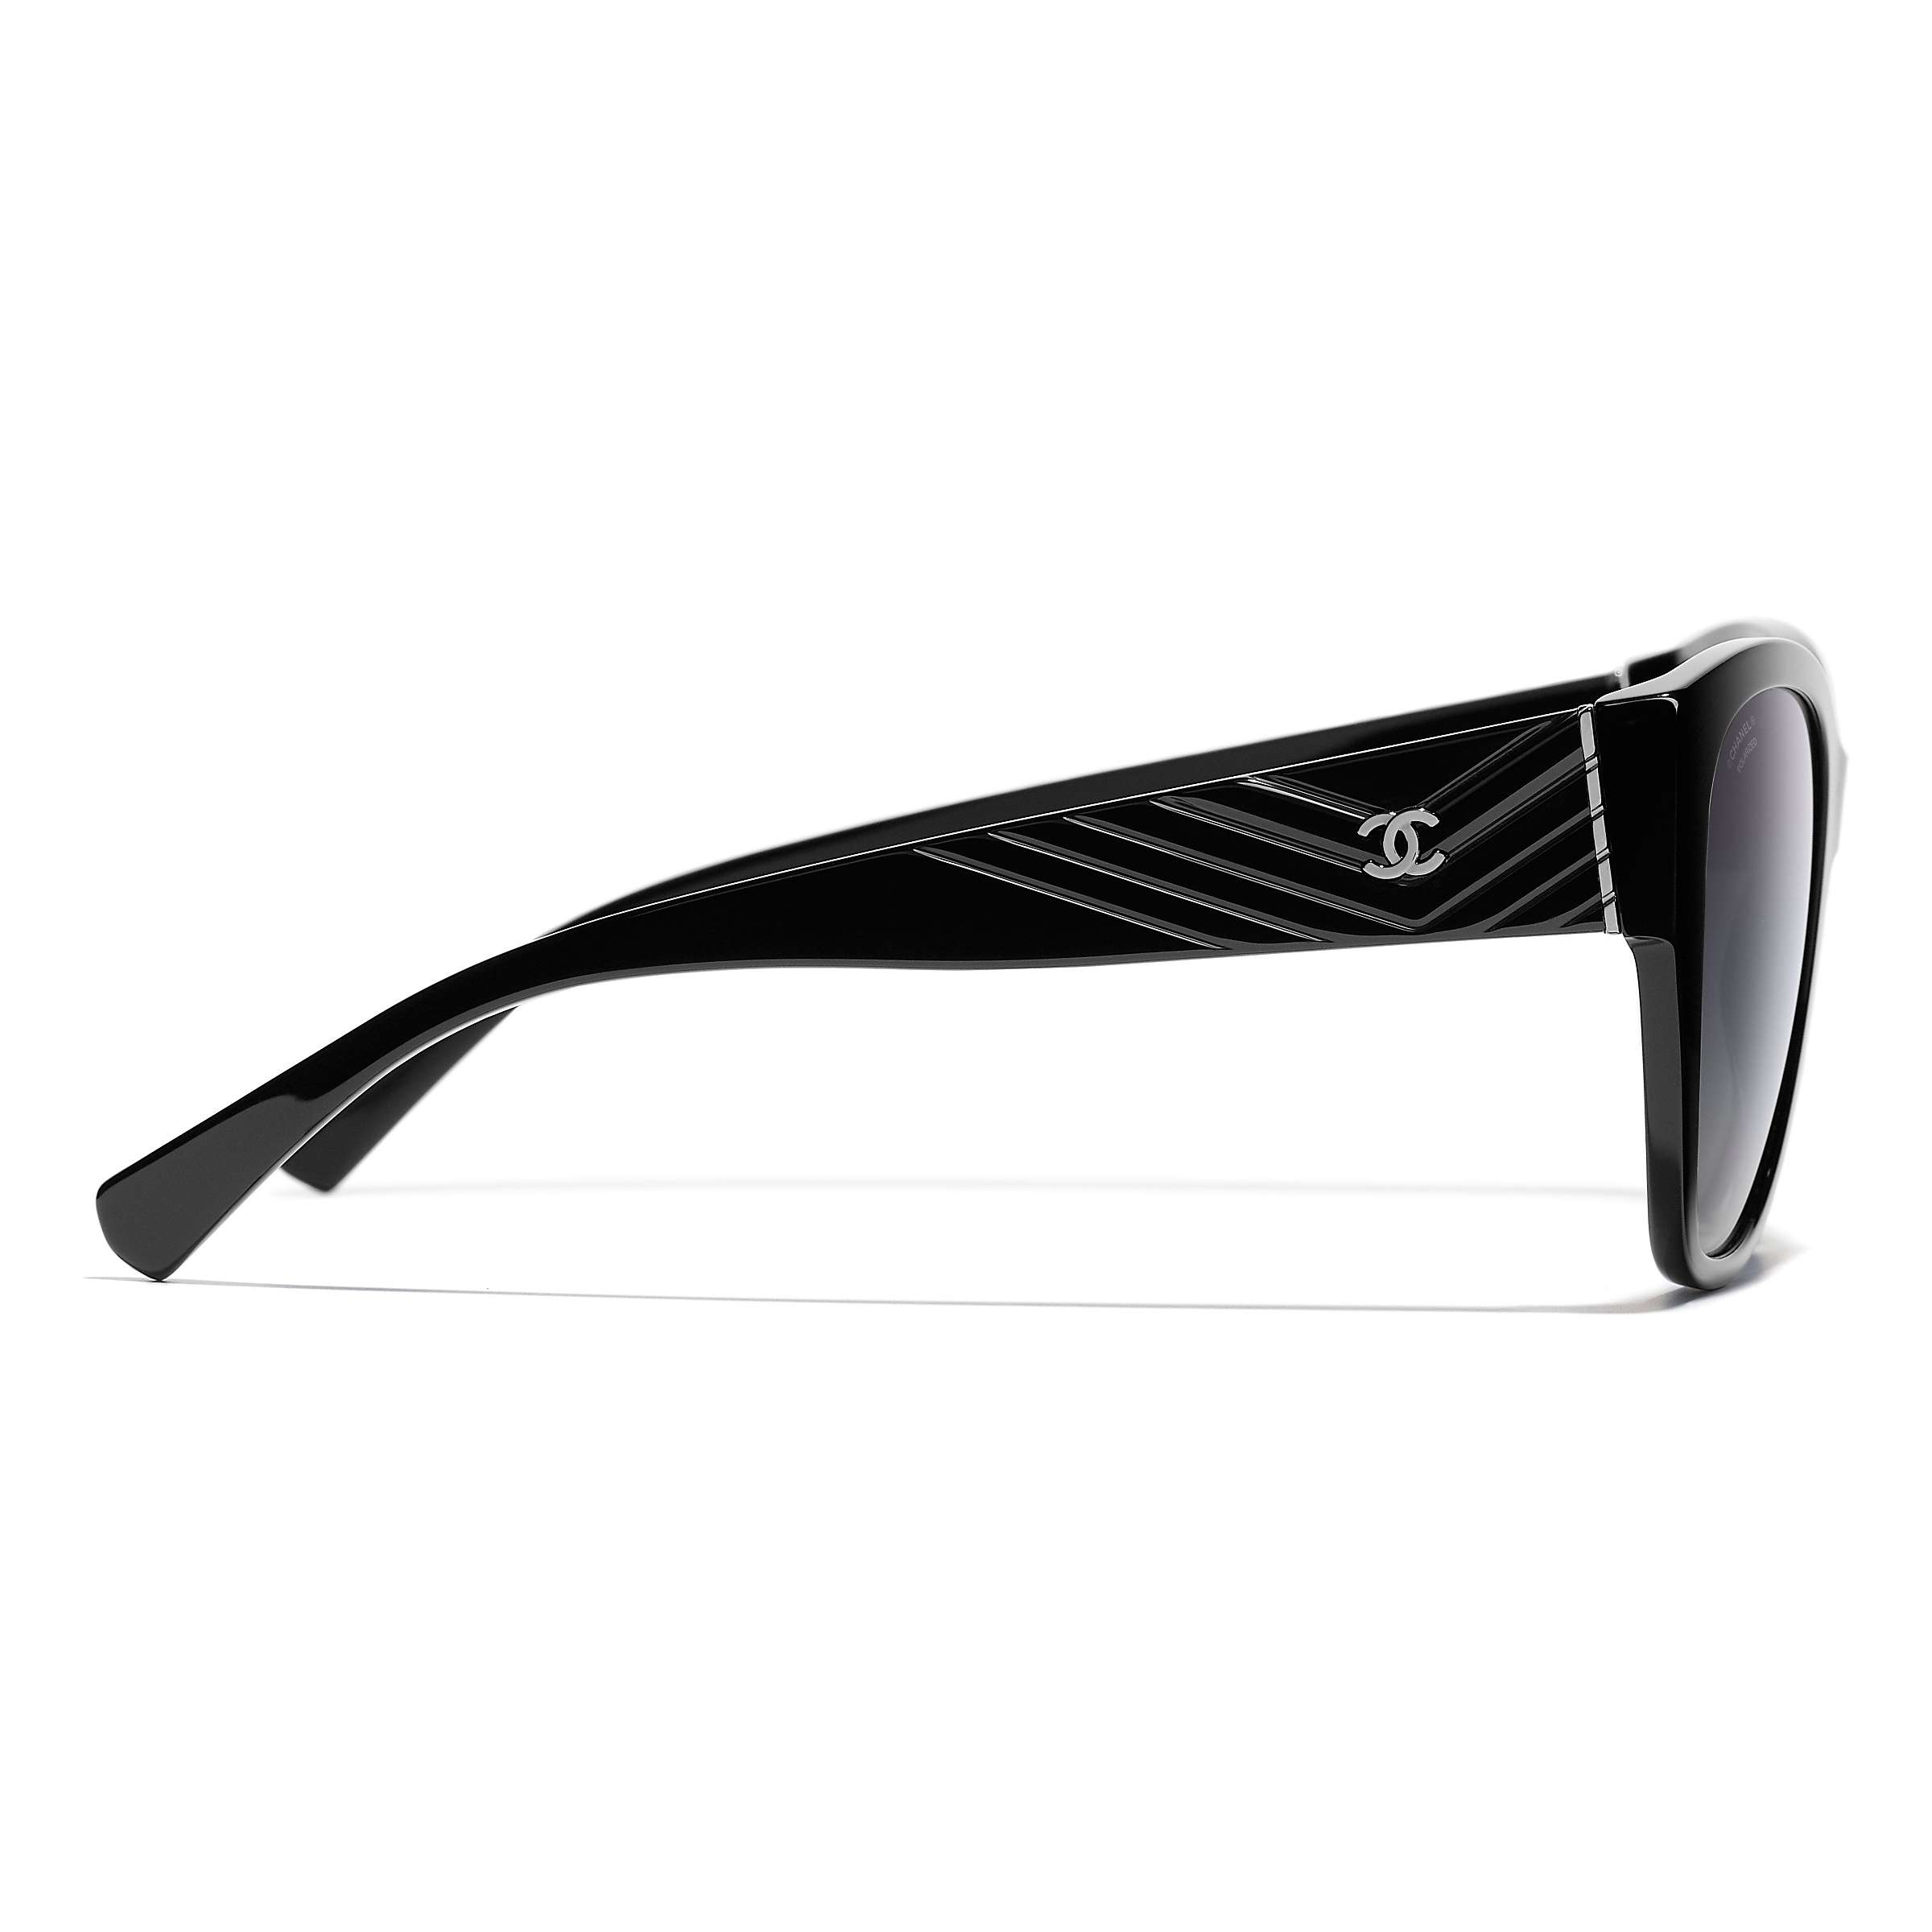 Buy CHANEL Polarised Butterfly Sunglasses CH5412 Black/Grey Gradient Online at johnlewis.com